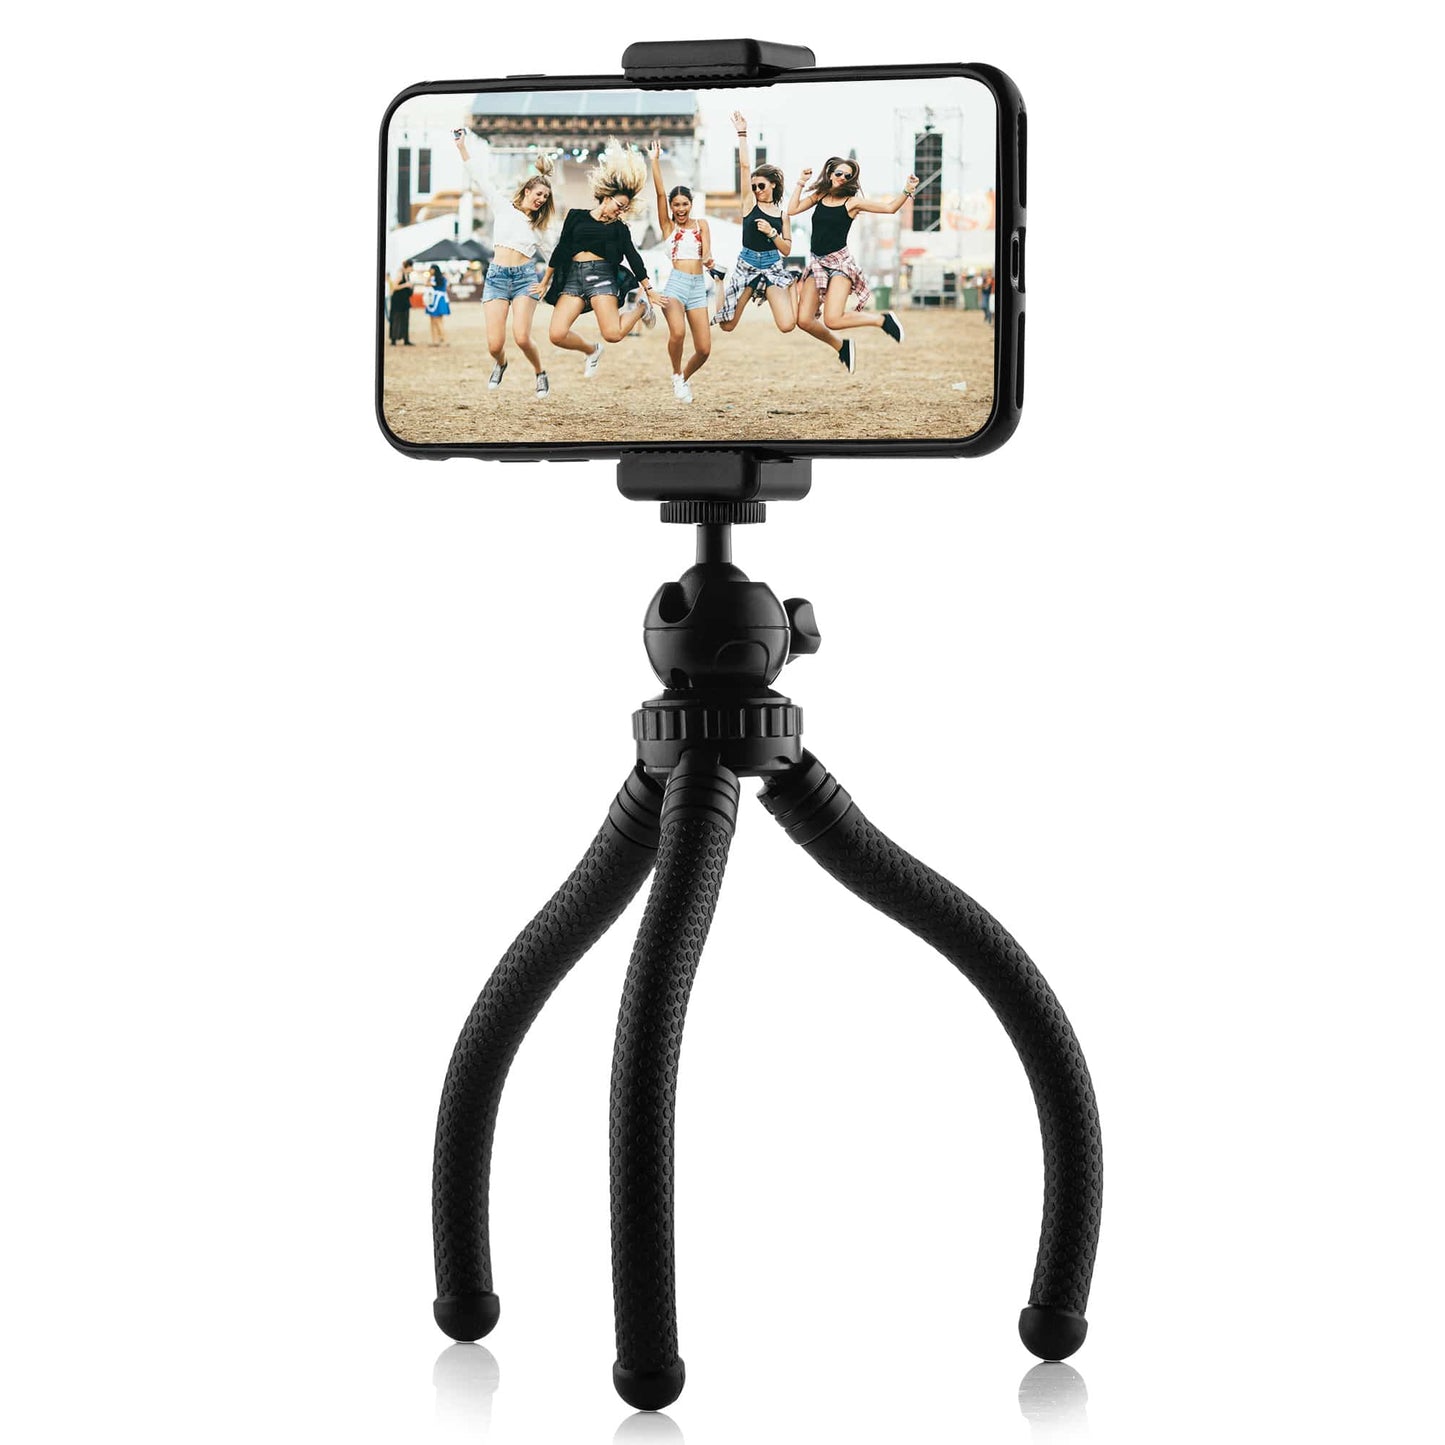 Flexible tripod with extra sturdy legs SET: includes phone holder, bluetooth remote shutter, GoPro mount adapter storage bag